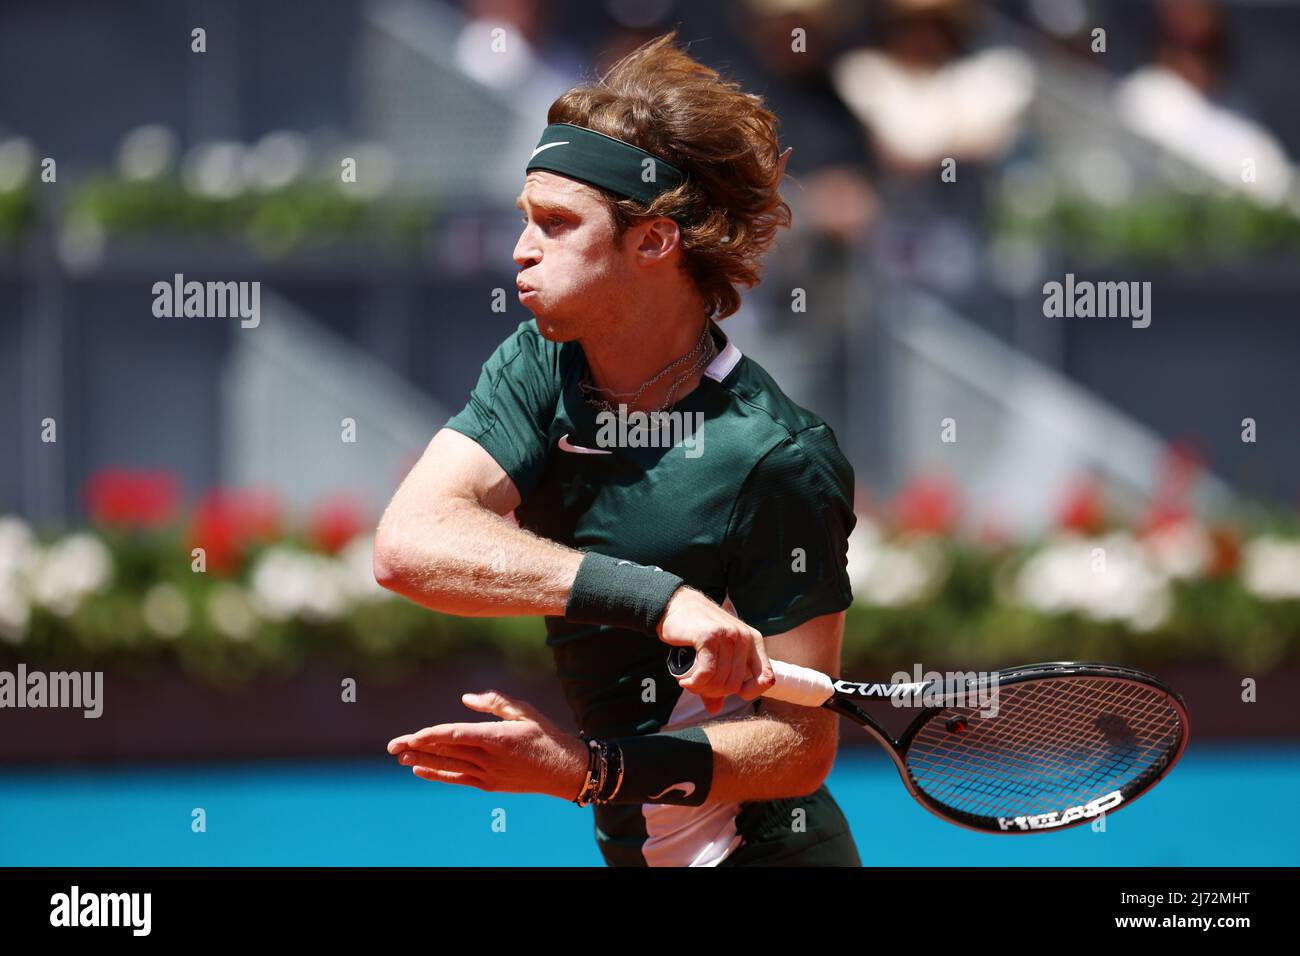 Andrey Rublev of Russia in action against Daniel Evans of Great Britain during the Mutua Madrid Open 2022 tennis tournament on May 5, 2022 at Caja Magica stadium in Madrid, Spain -